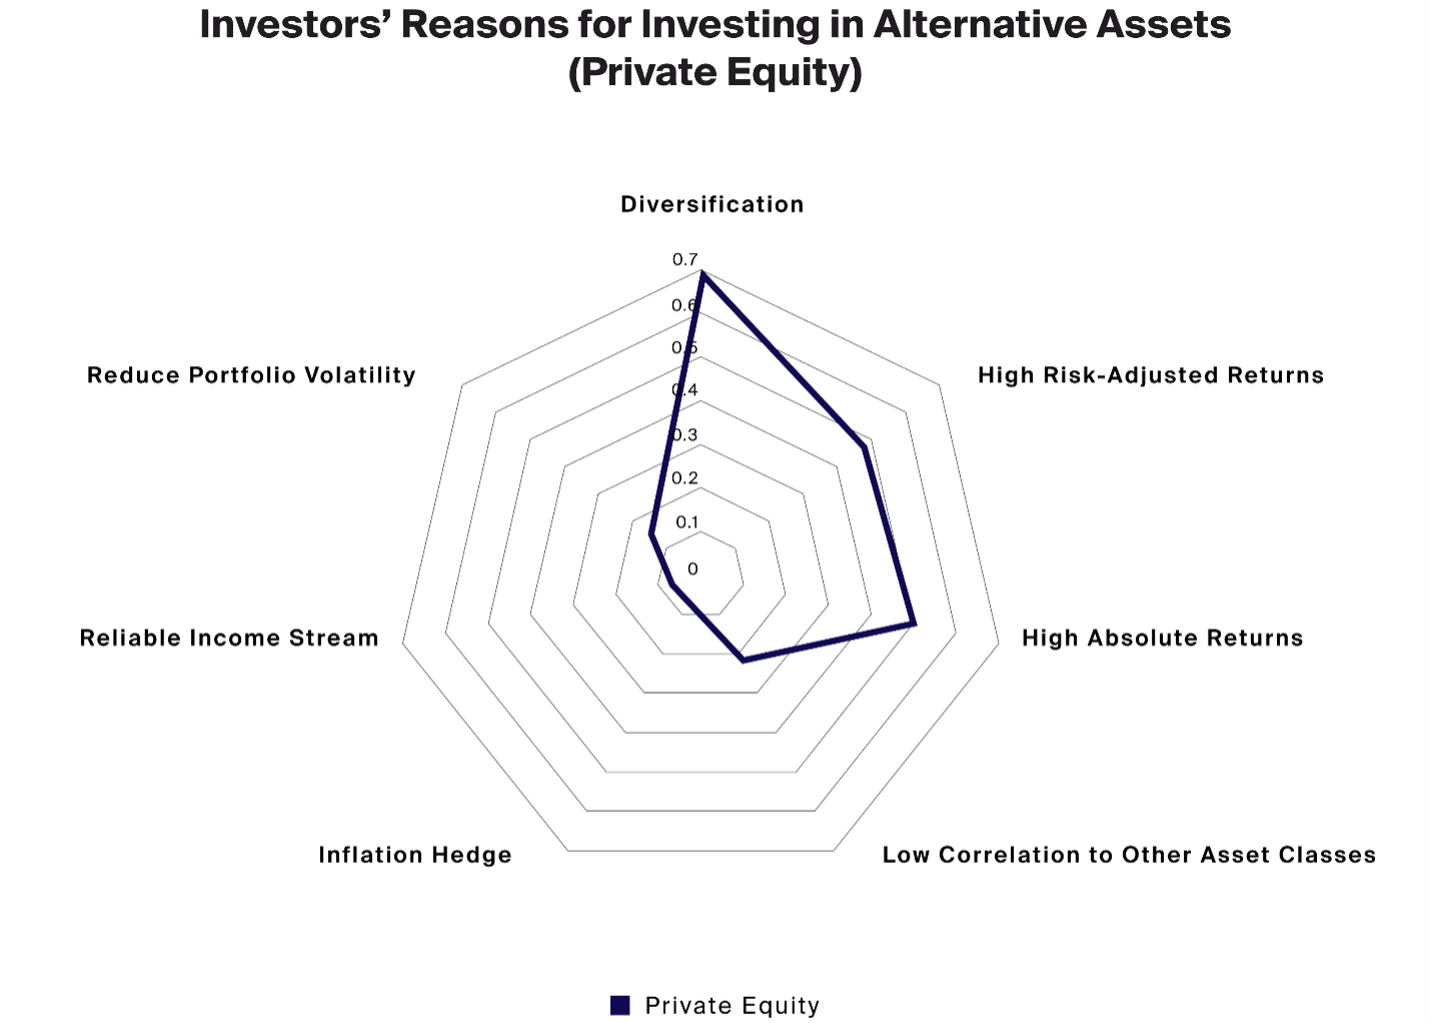 Exhibit 2: Investors tend to allocate to private equity seeking diversification and the potential for better risk-adjusted and absolute returns